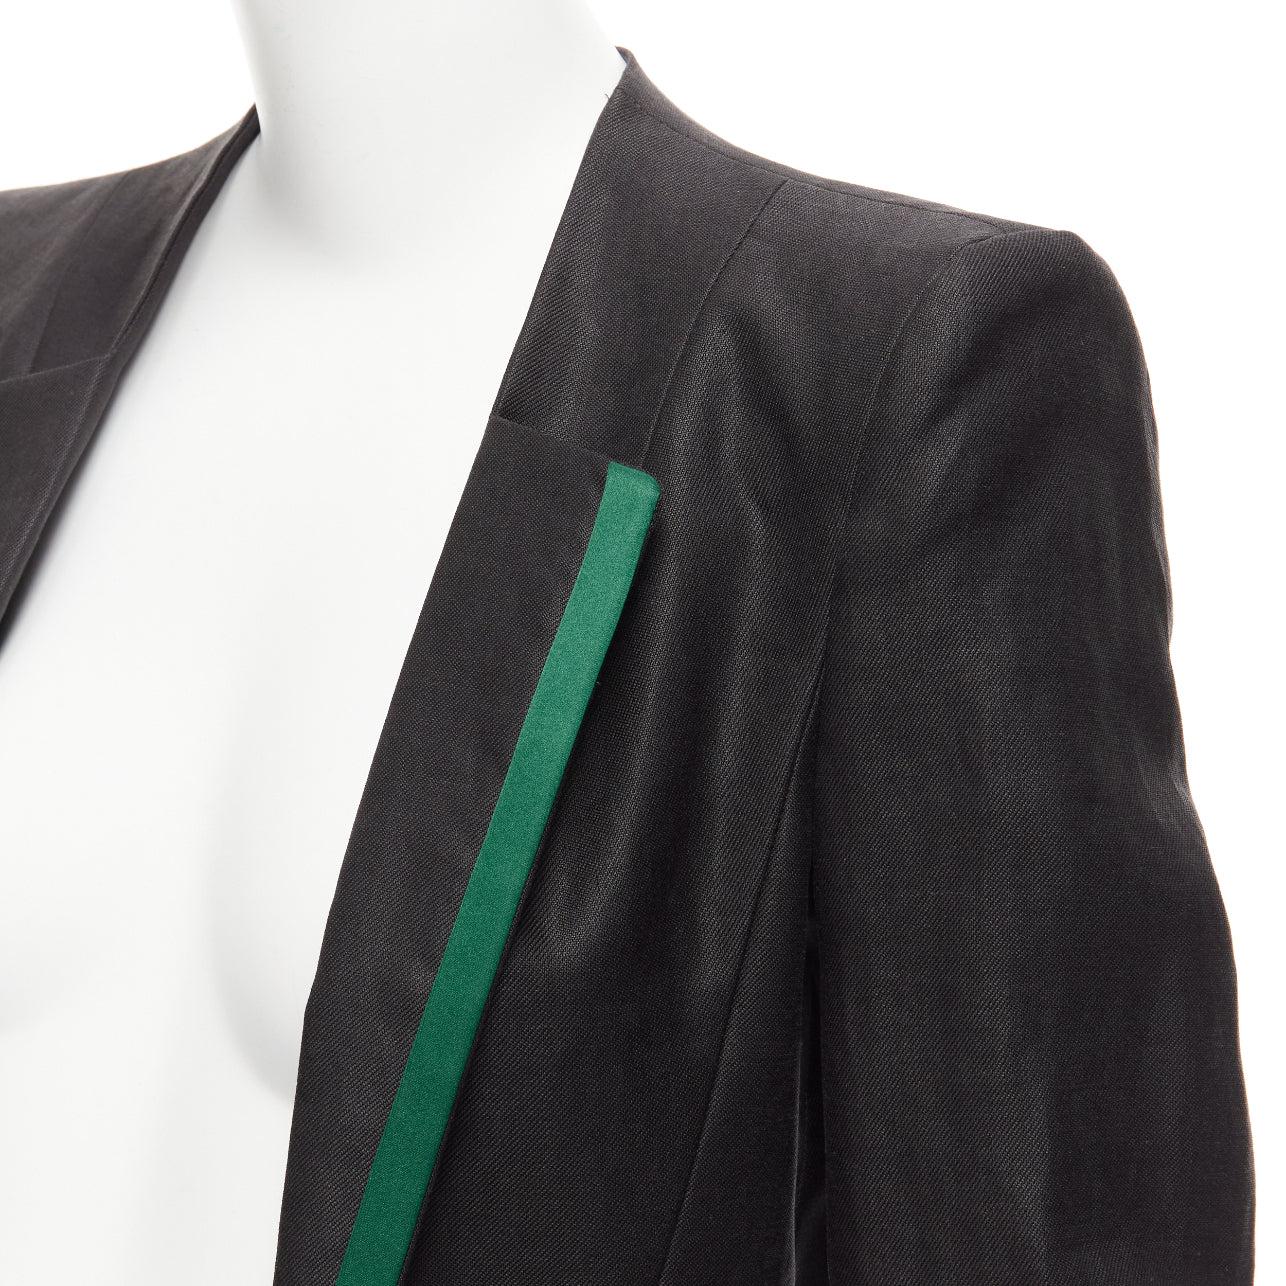 HAIDER ACKERMANN black ramie silk green trim cropped blazer jacket FR36 S
Reference: NKLL/A00181
Brand: Haider Ackermann
Material: Ramie, Silk
Color: Black, Green
Pattern: Solid
Lining: Black Fabric
Extra Details: Shoulder pads.
Made in: